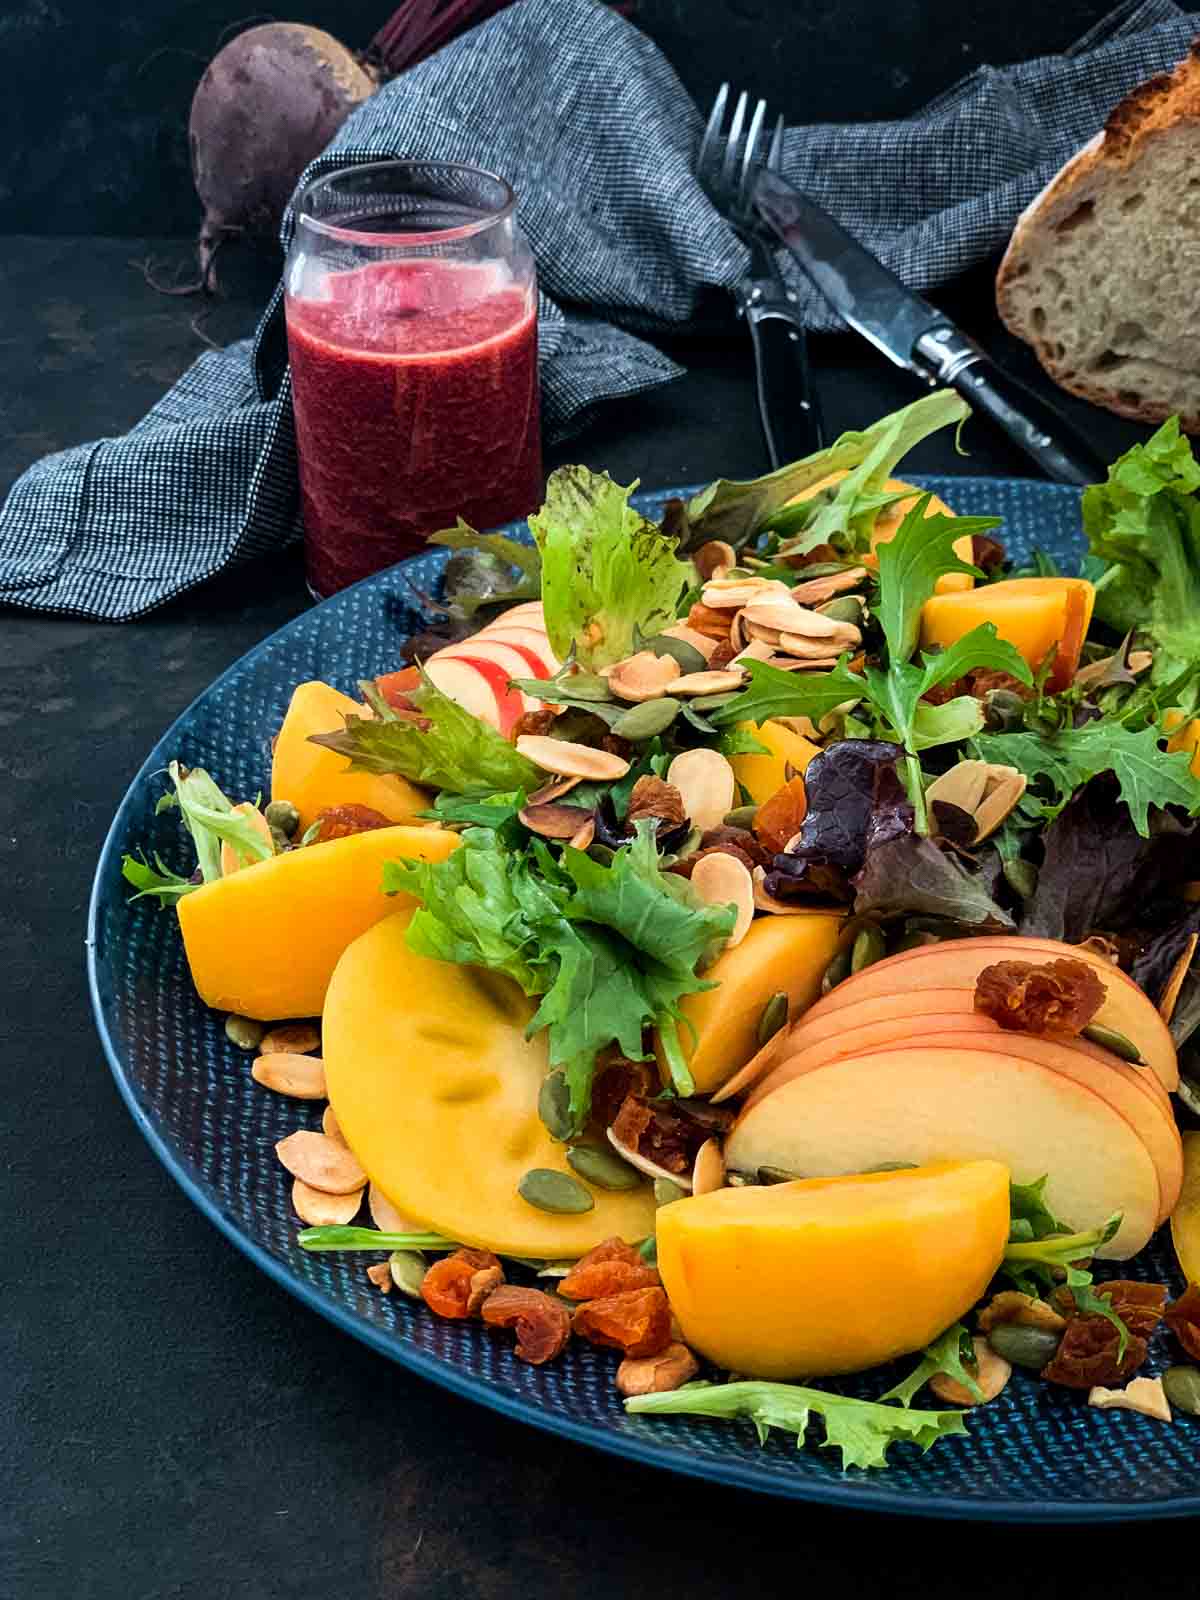 Salad with Persimmons and Beetroot Dressing on a blue plate with whole beetroot and some fresh bread